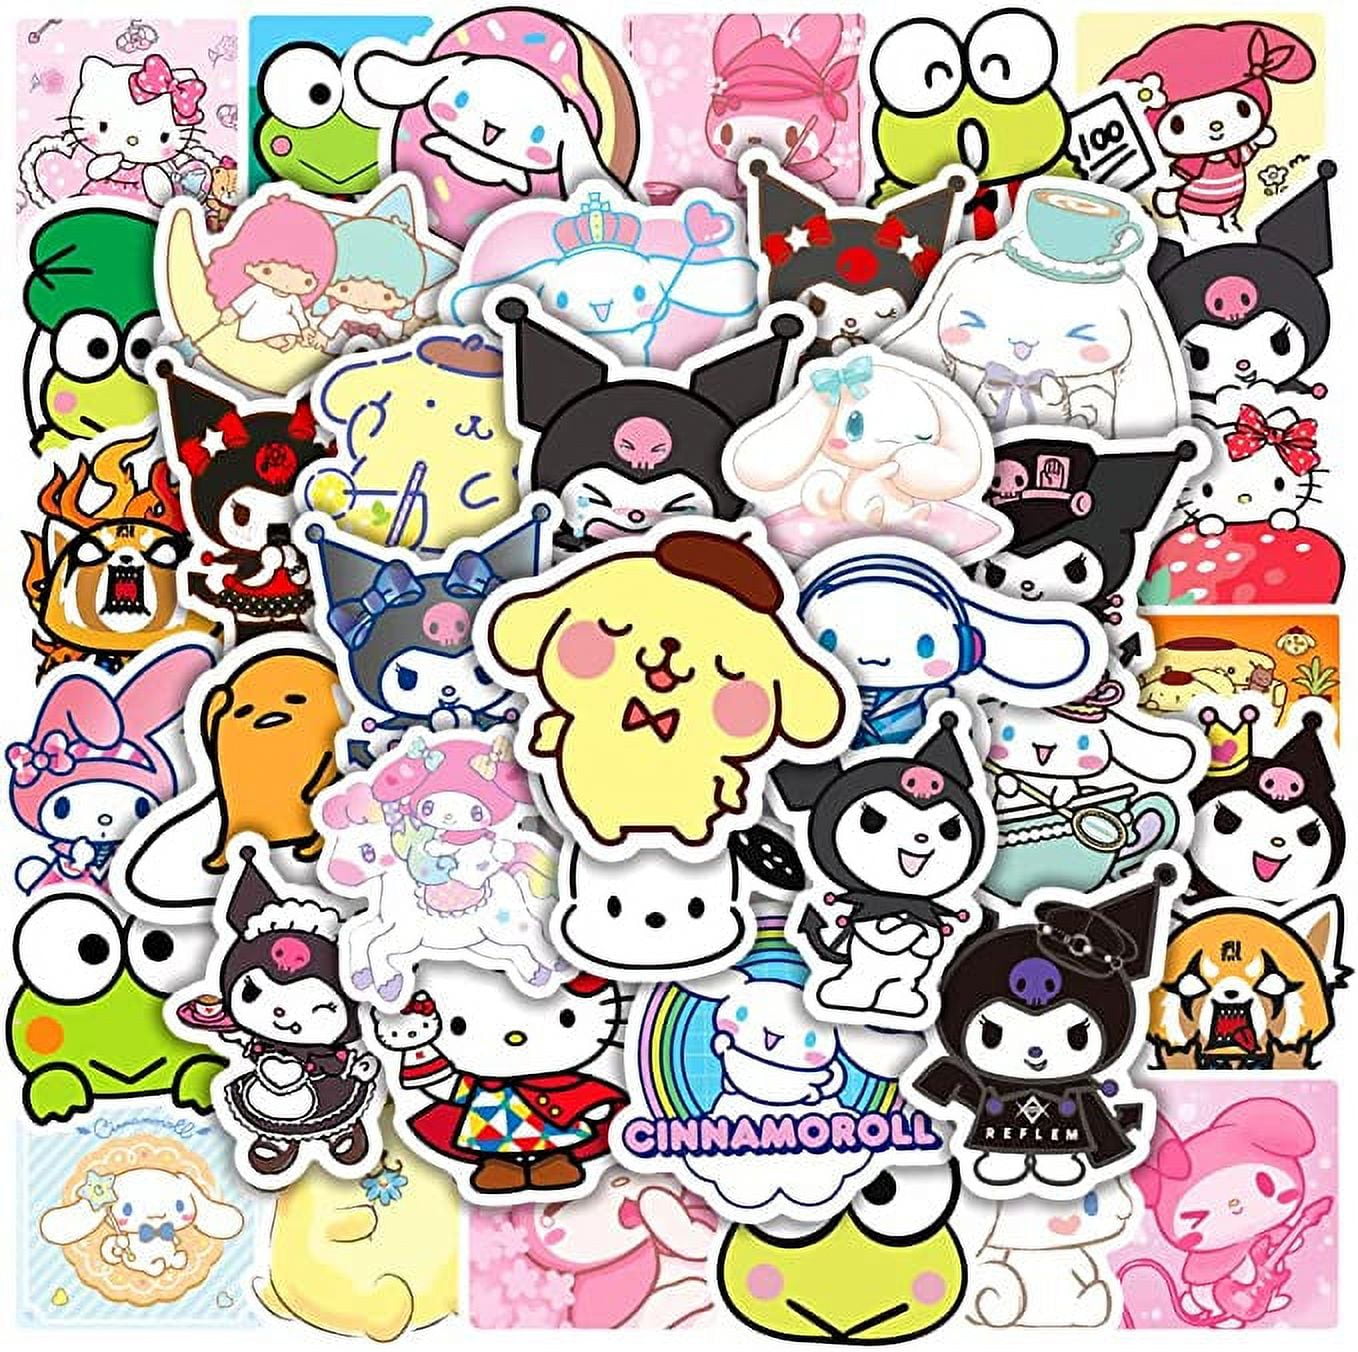  Warrior Cats Stickers for Teens Kids Adults Eikecy Cute Cats  Stickers Pack 50Pcs Vinyl Waterproof Stickers for Laptop Water Bottles  Guitar Skateboard : Electronics